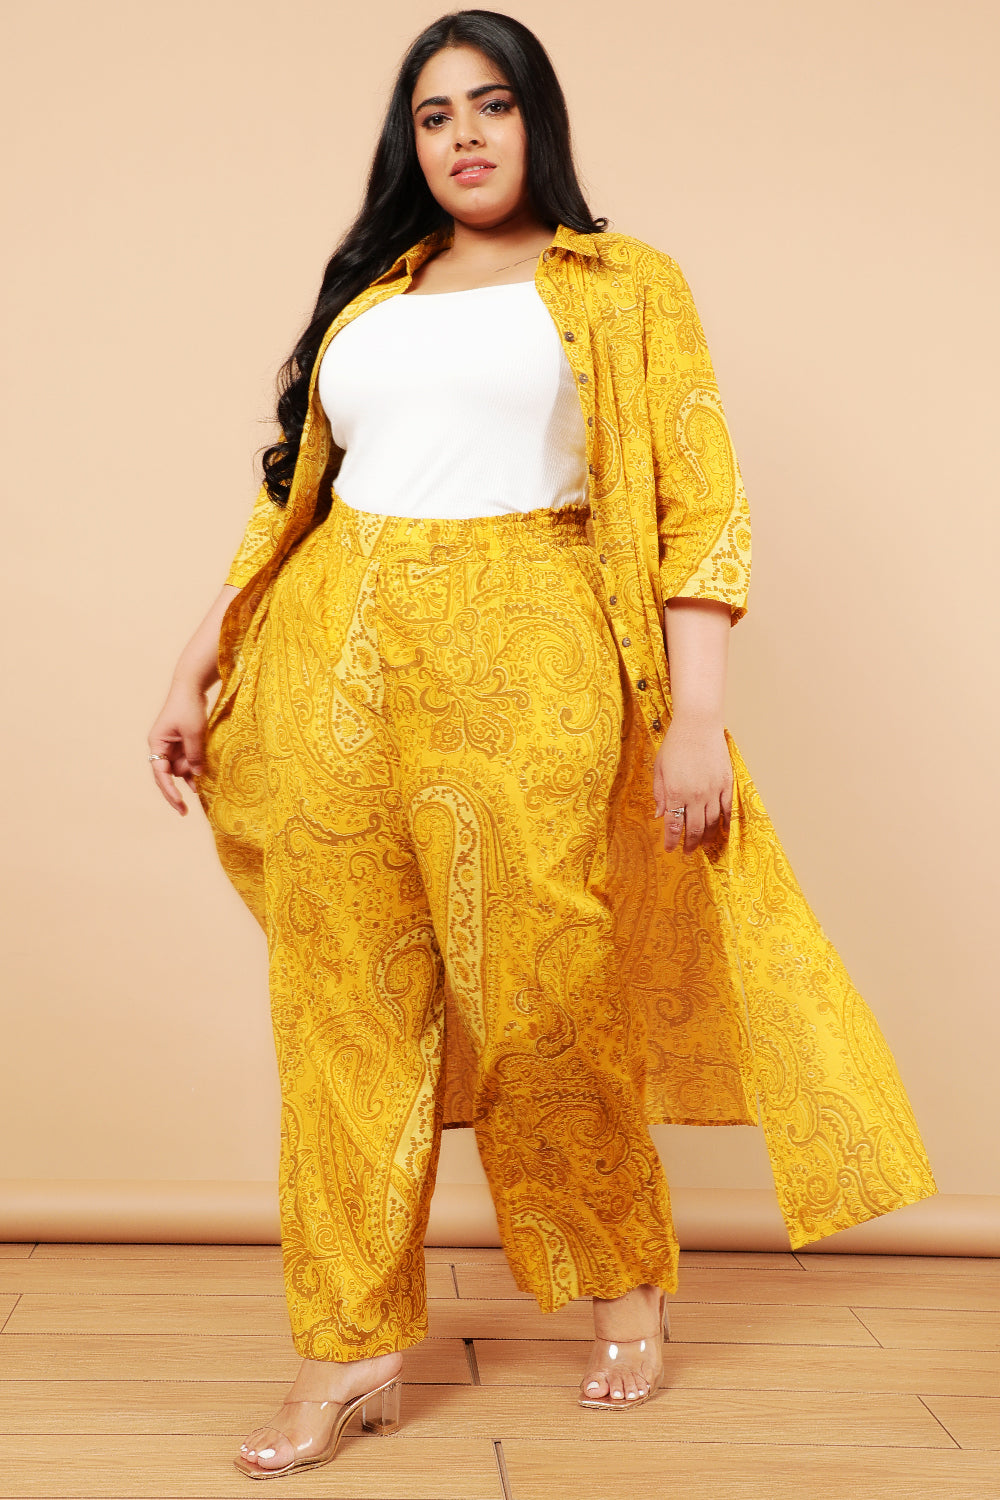 Plus Size Pastel Yellow Classic High Waisted Leggings